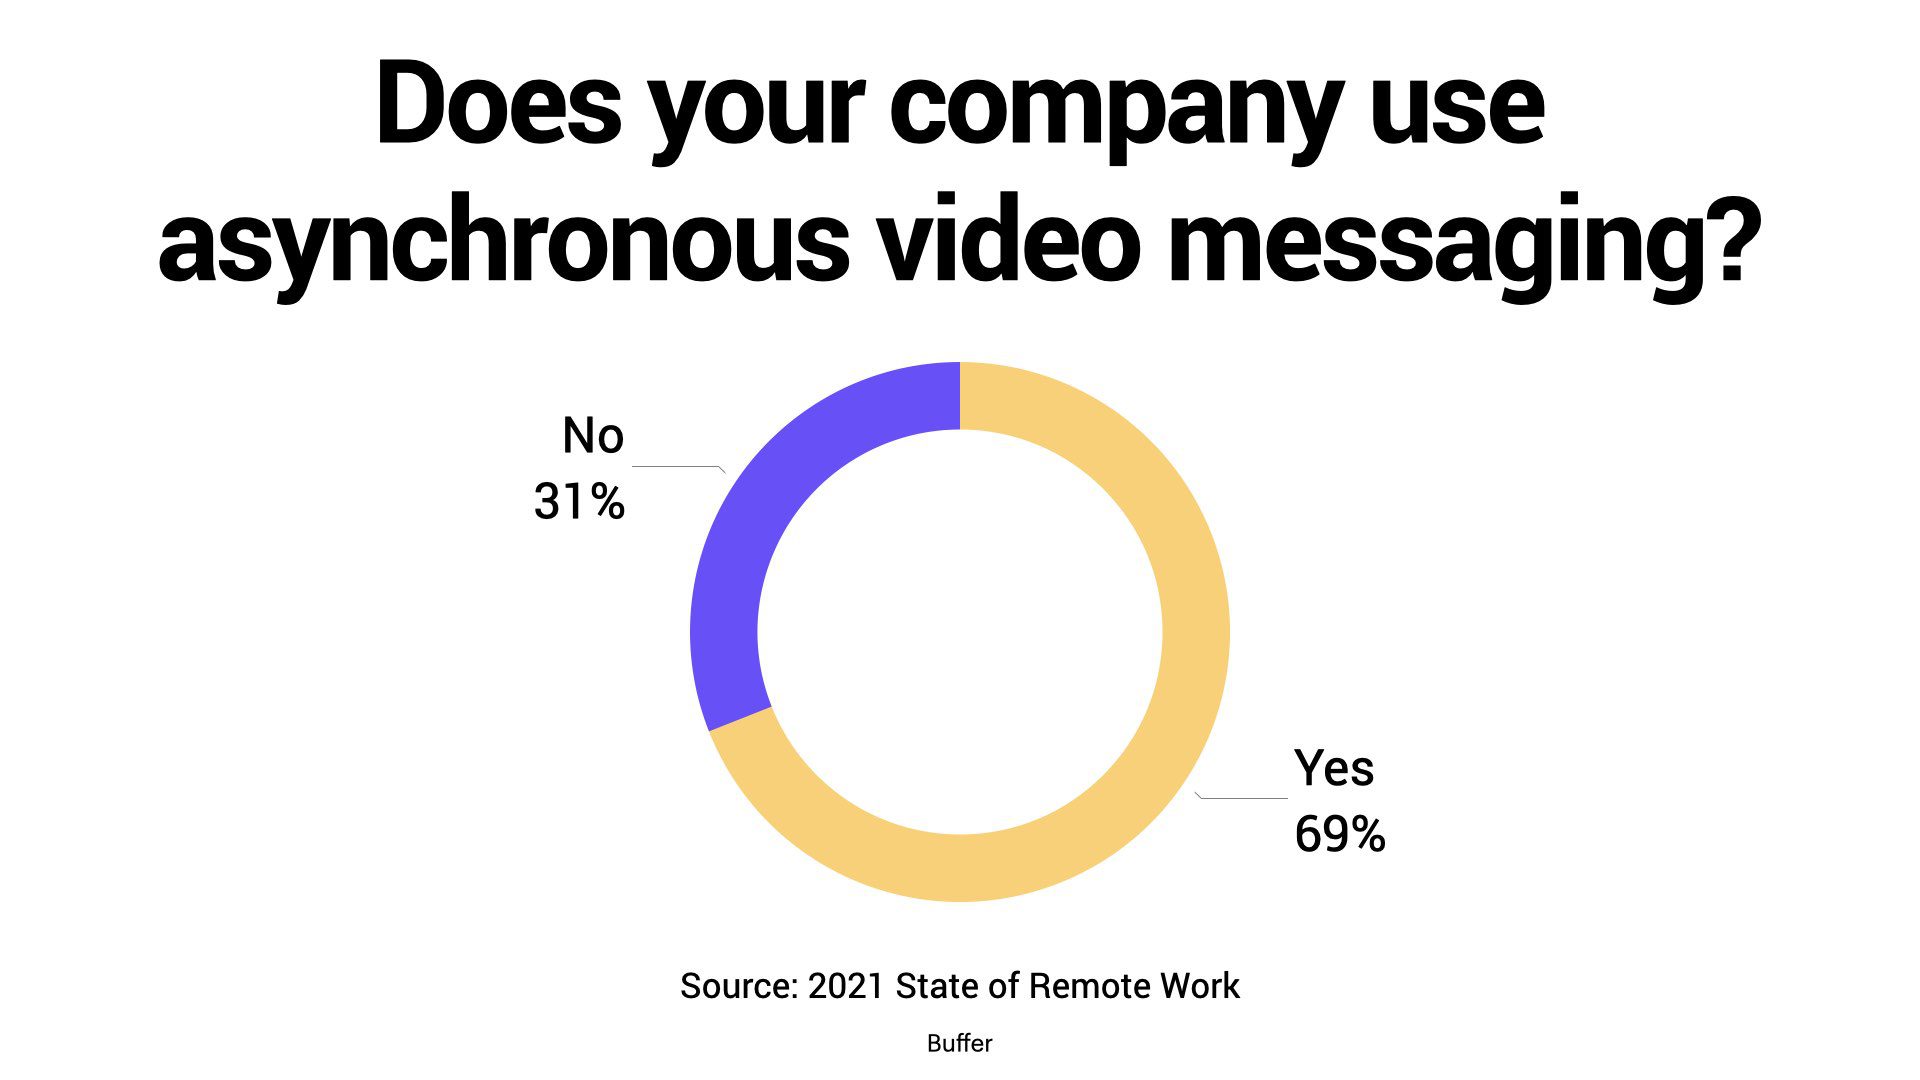 Does your company use asynchronous video messaging